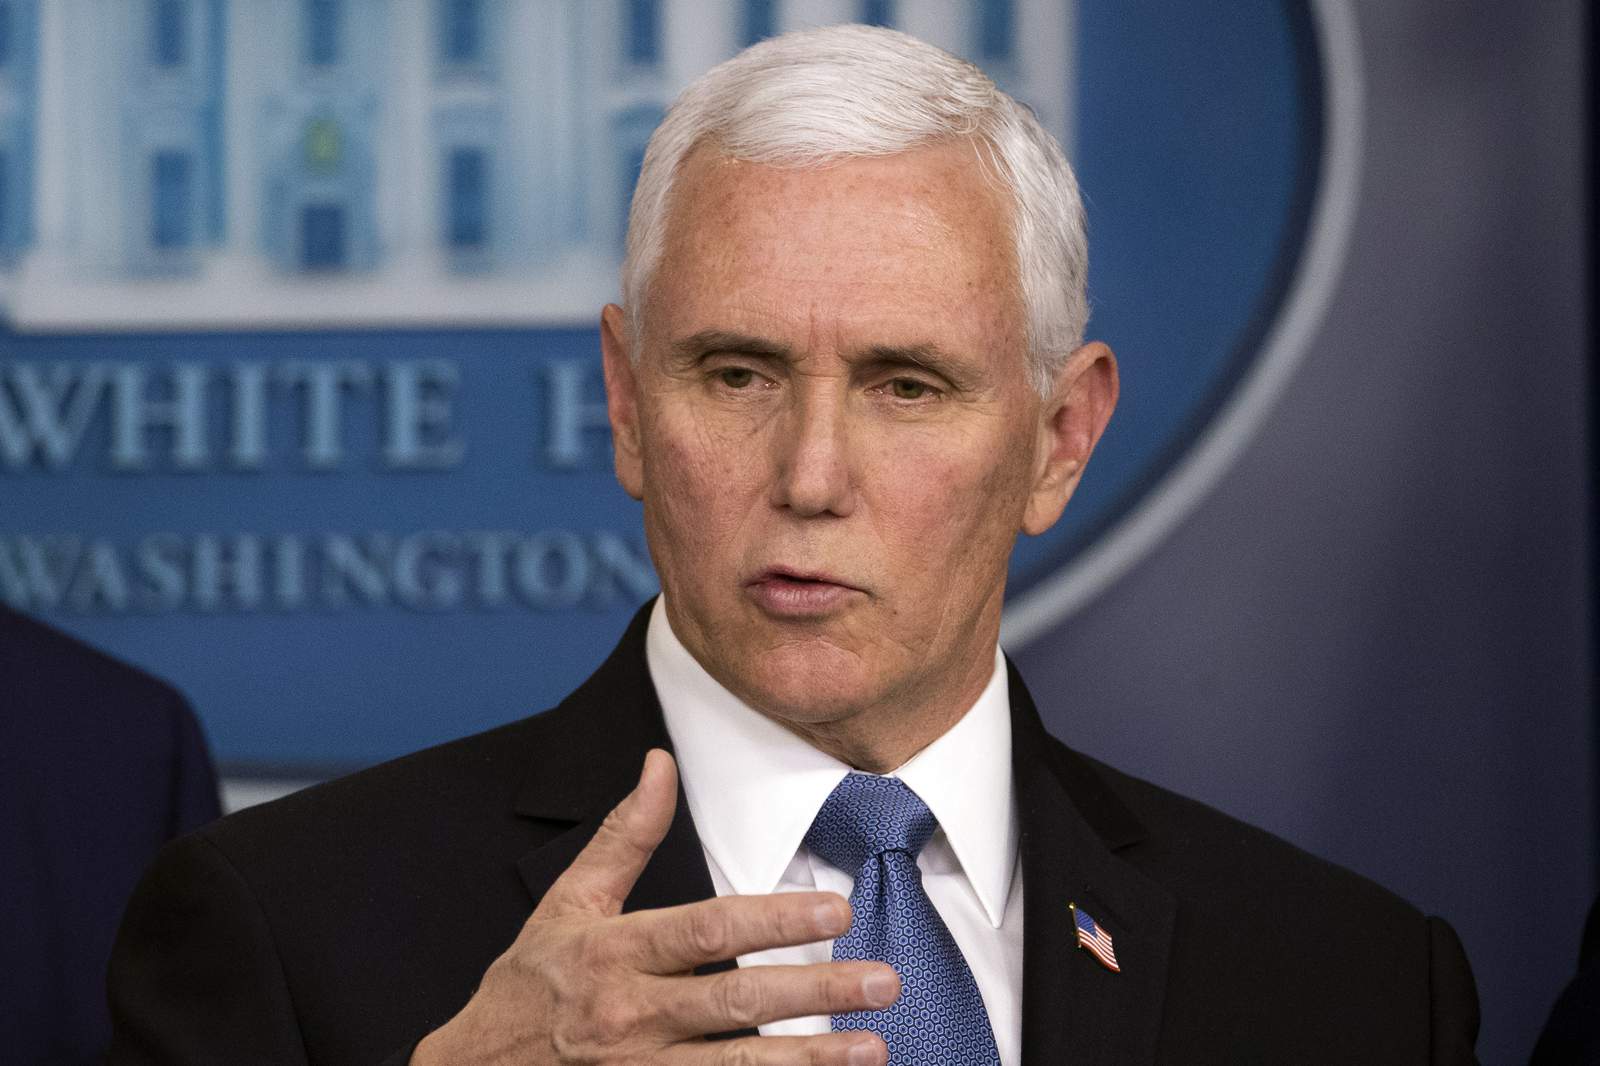 Pence: ‘Any American can be tested’ for coronavirus